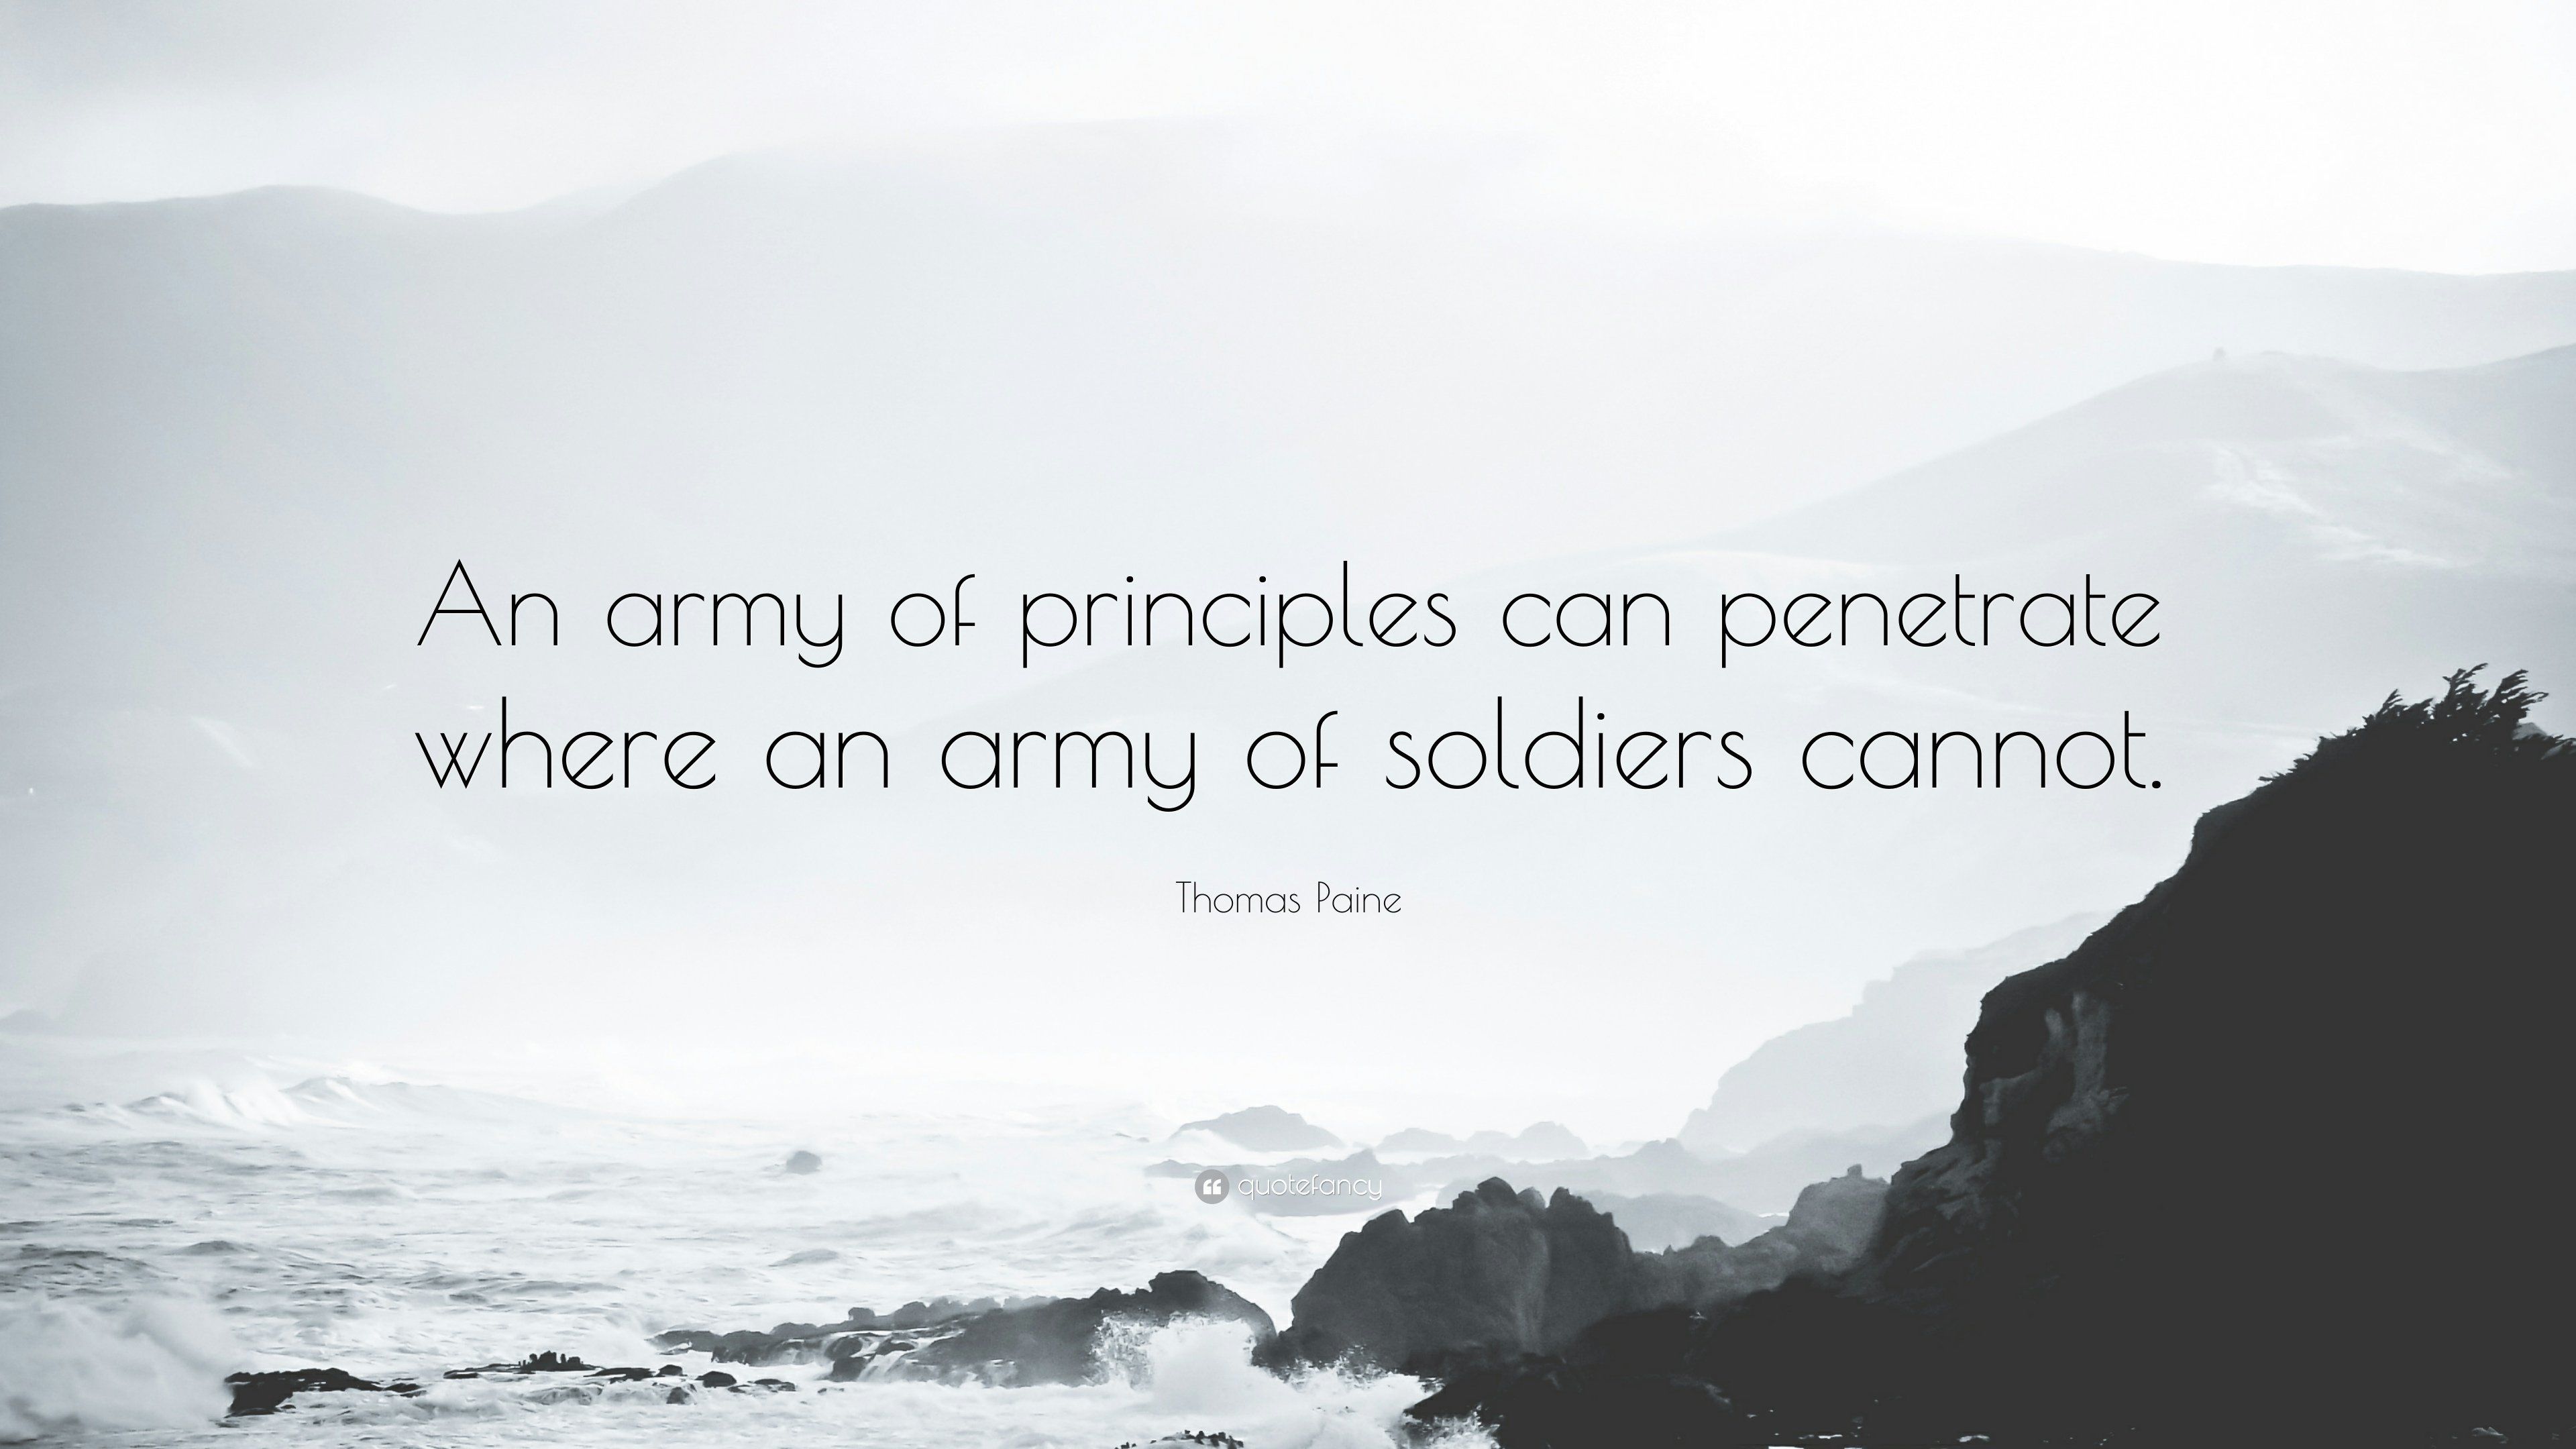 best of Penetrate can principles An of army